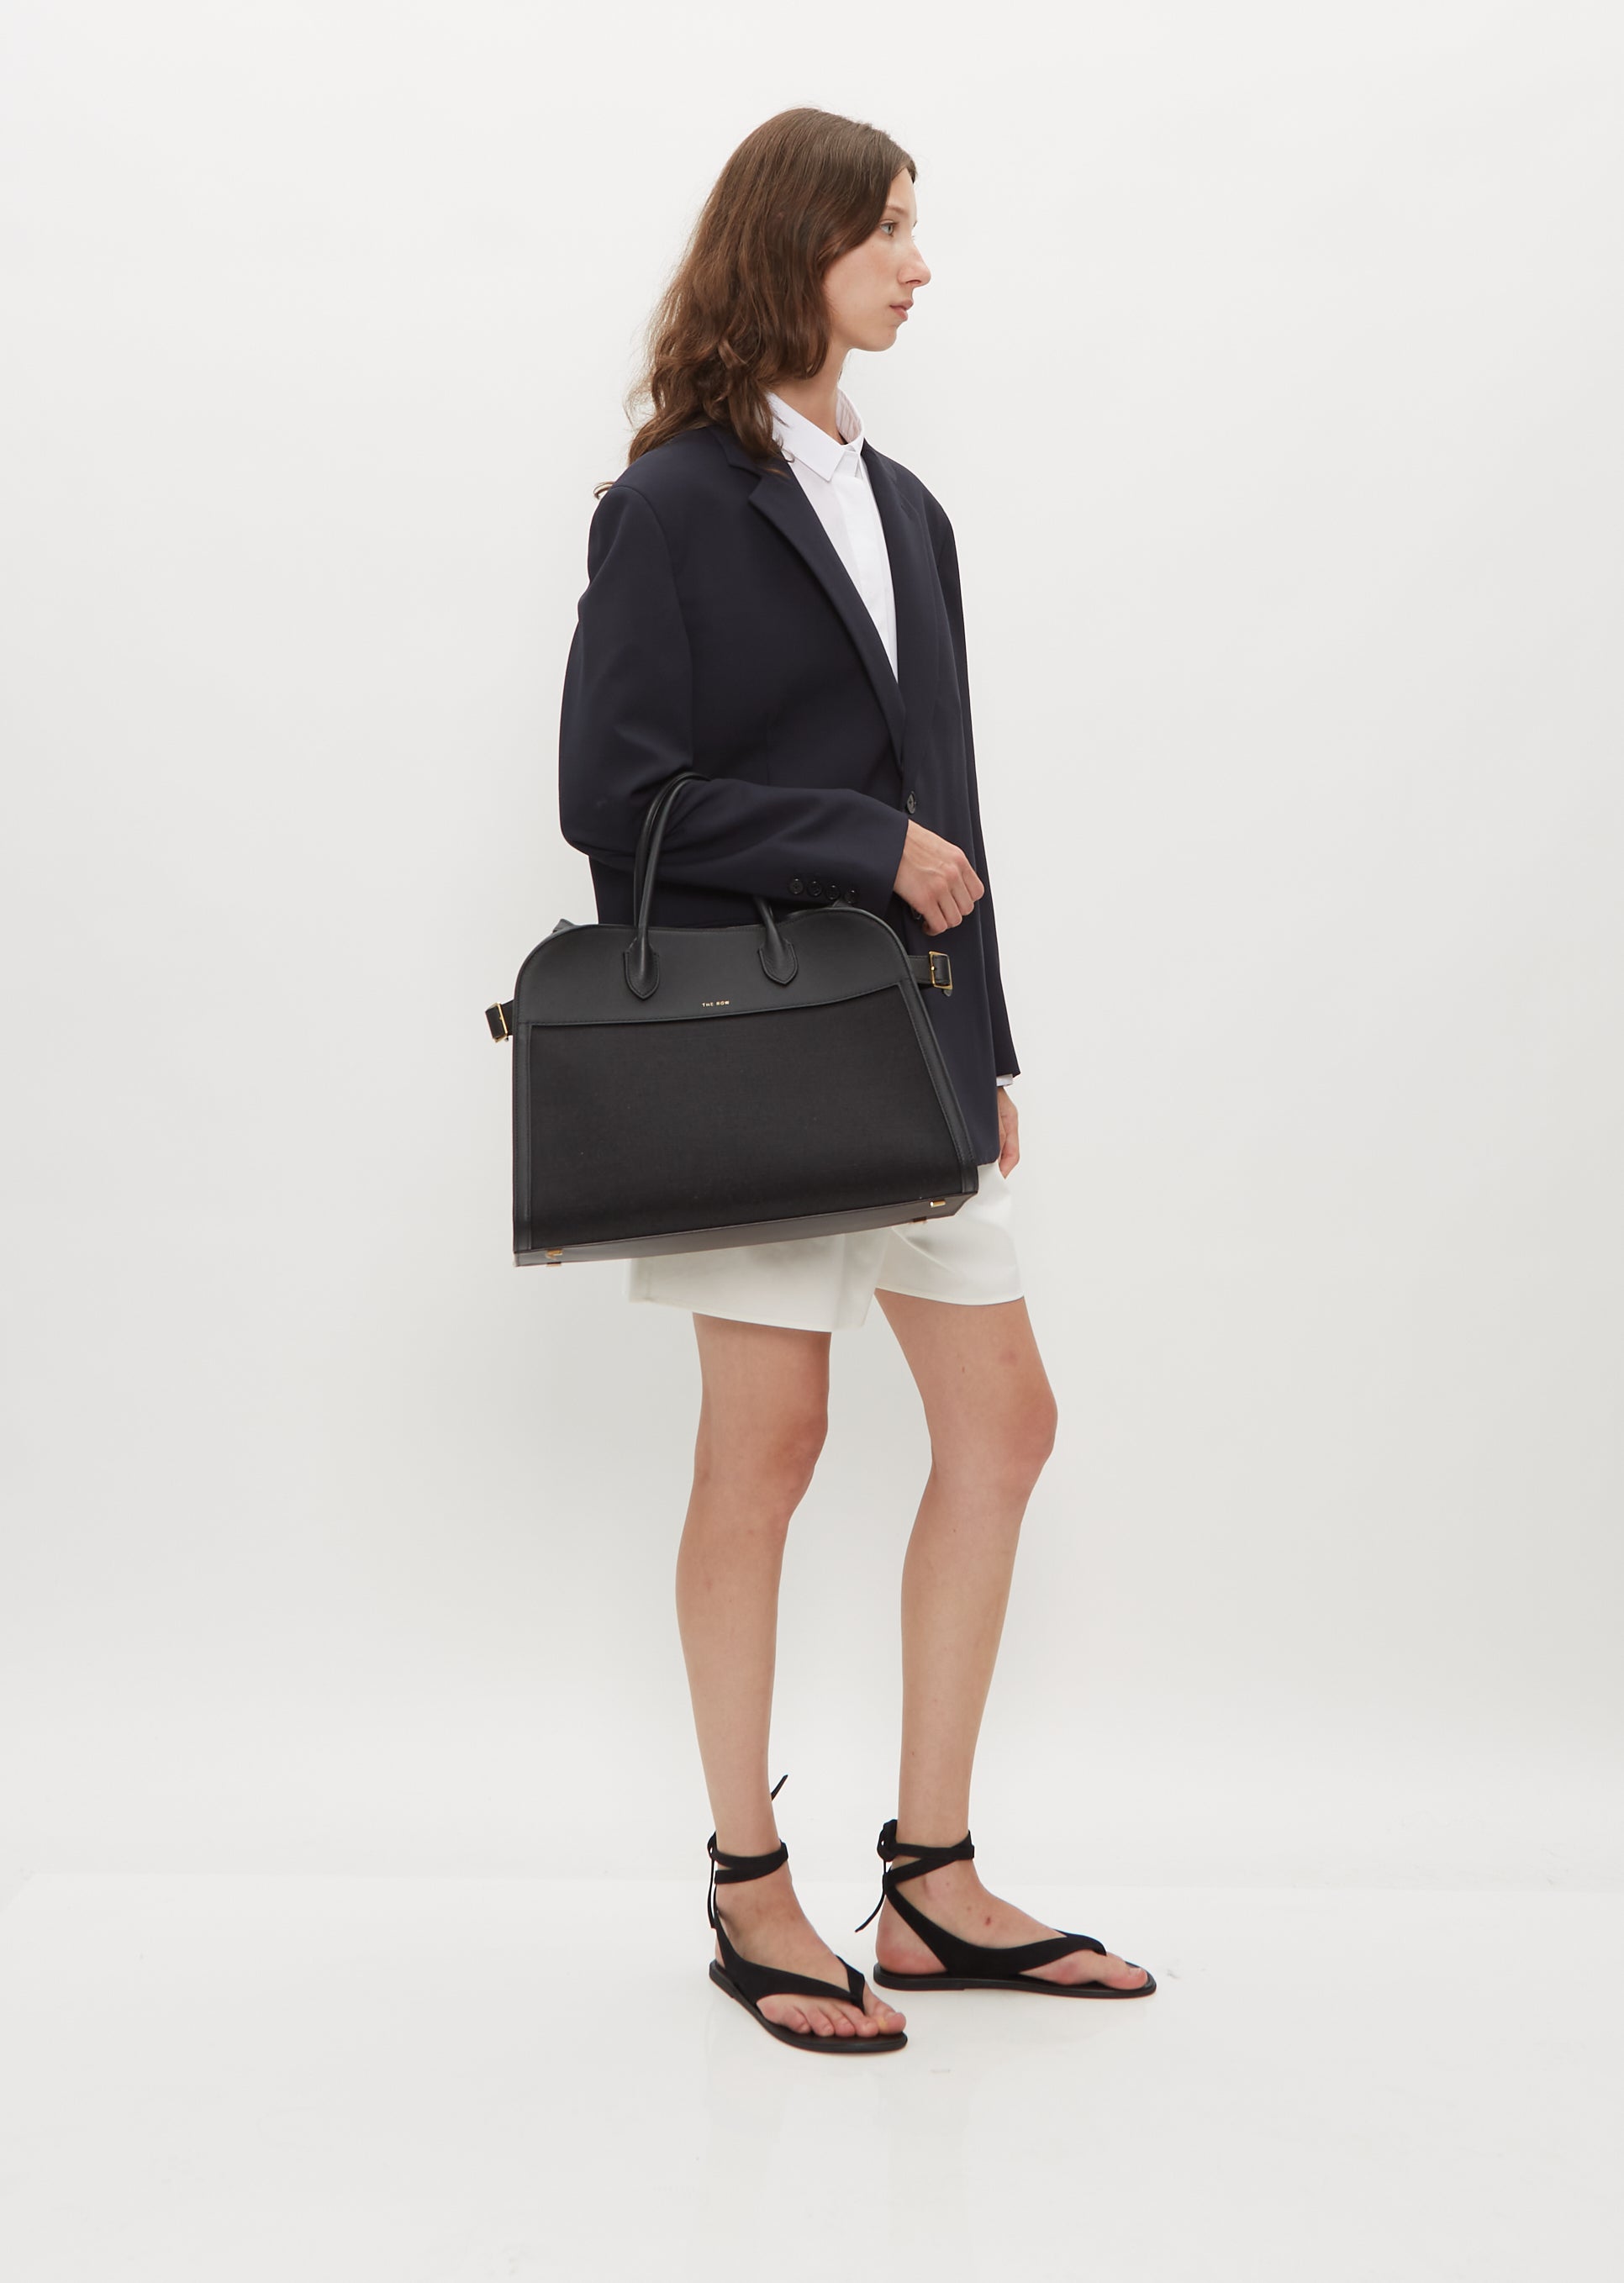 The Row Margaux 15 Top-Handle Bag in Grain Leather